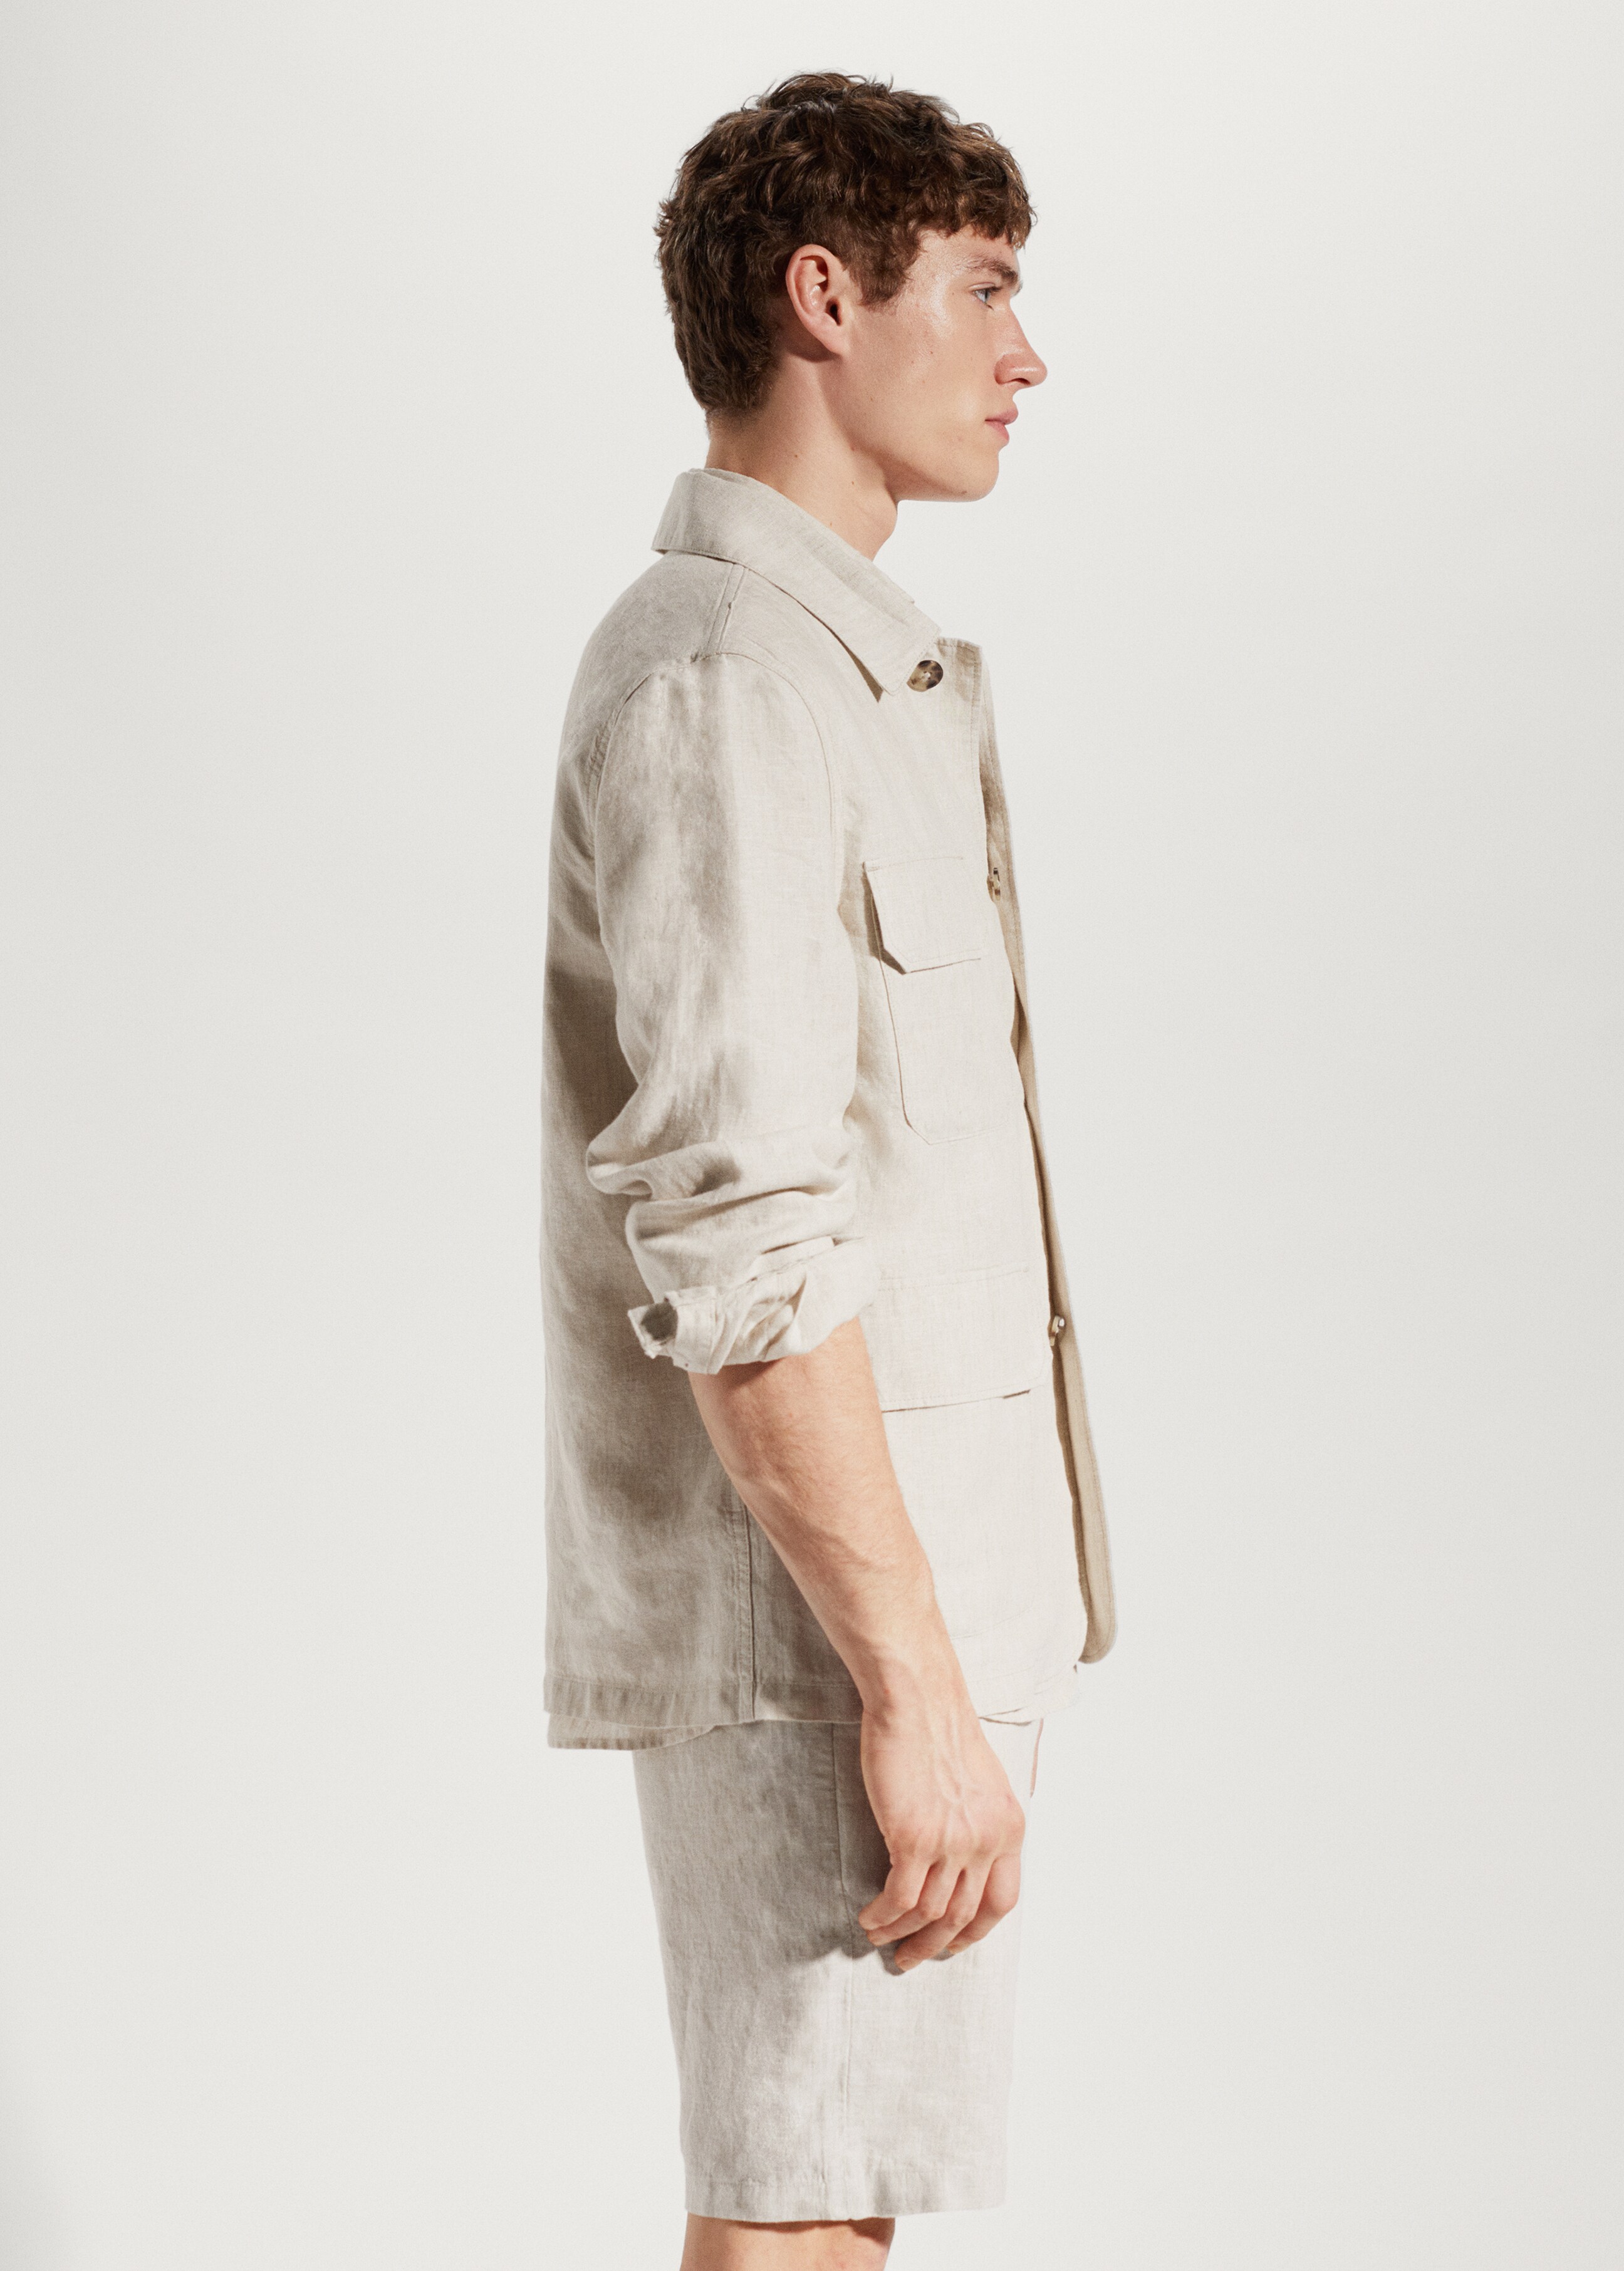 100% linen overshirt with pockets - Details of the article 2